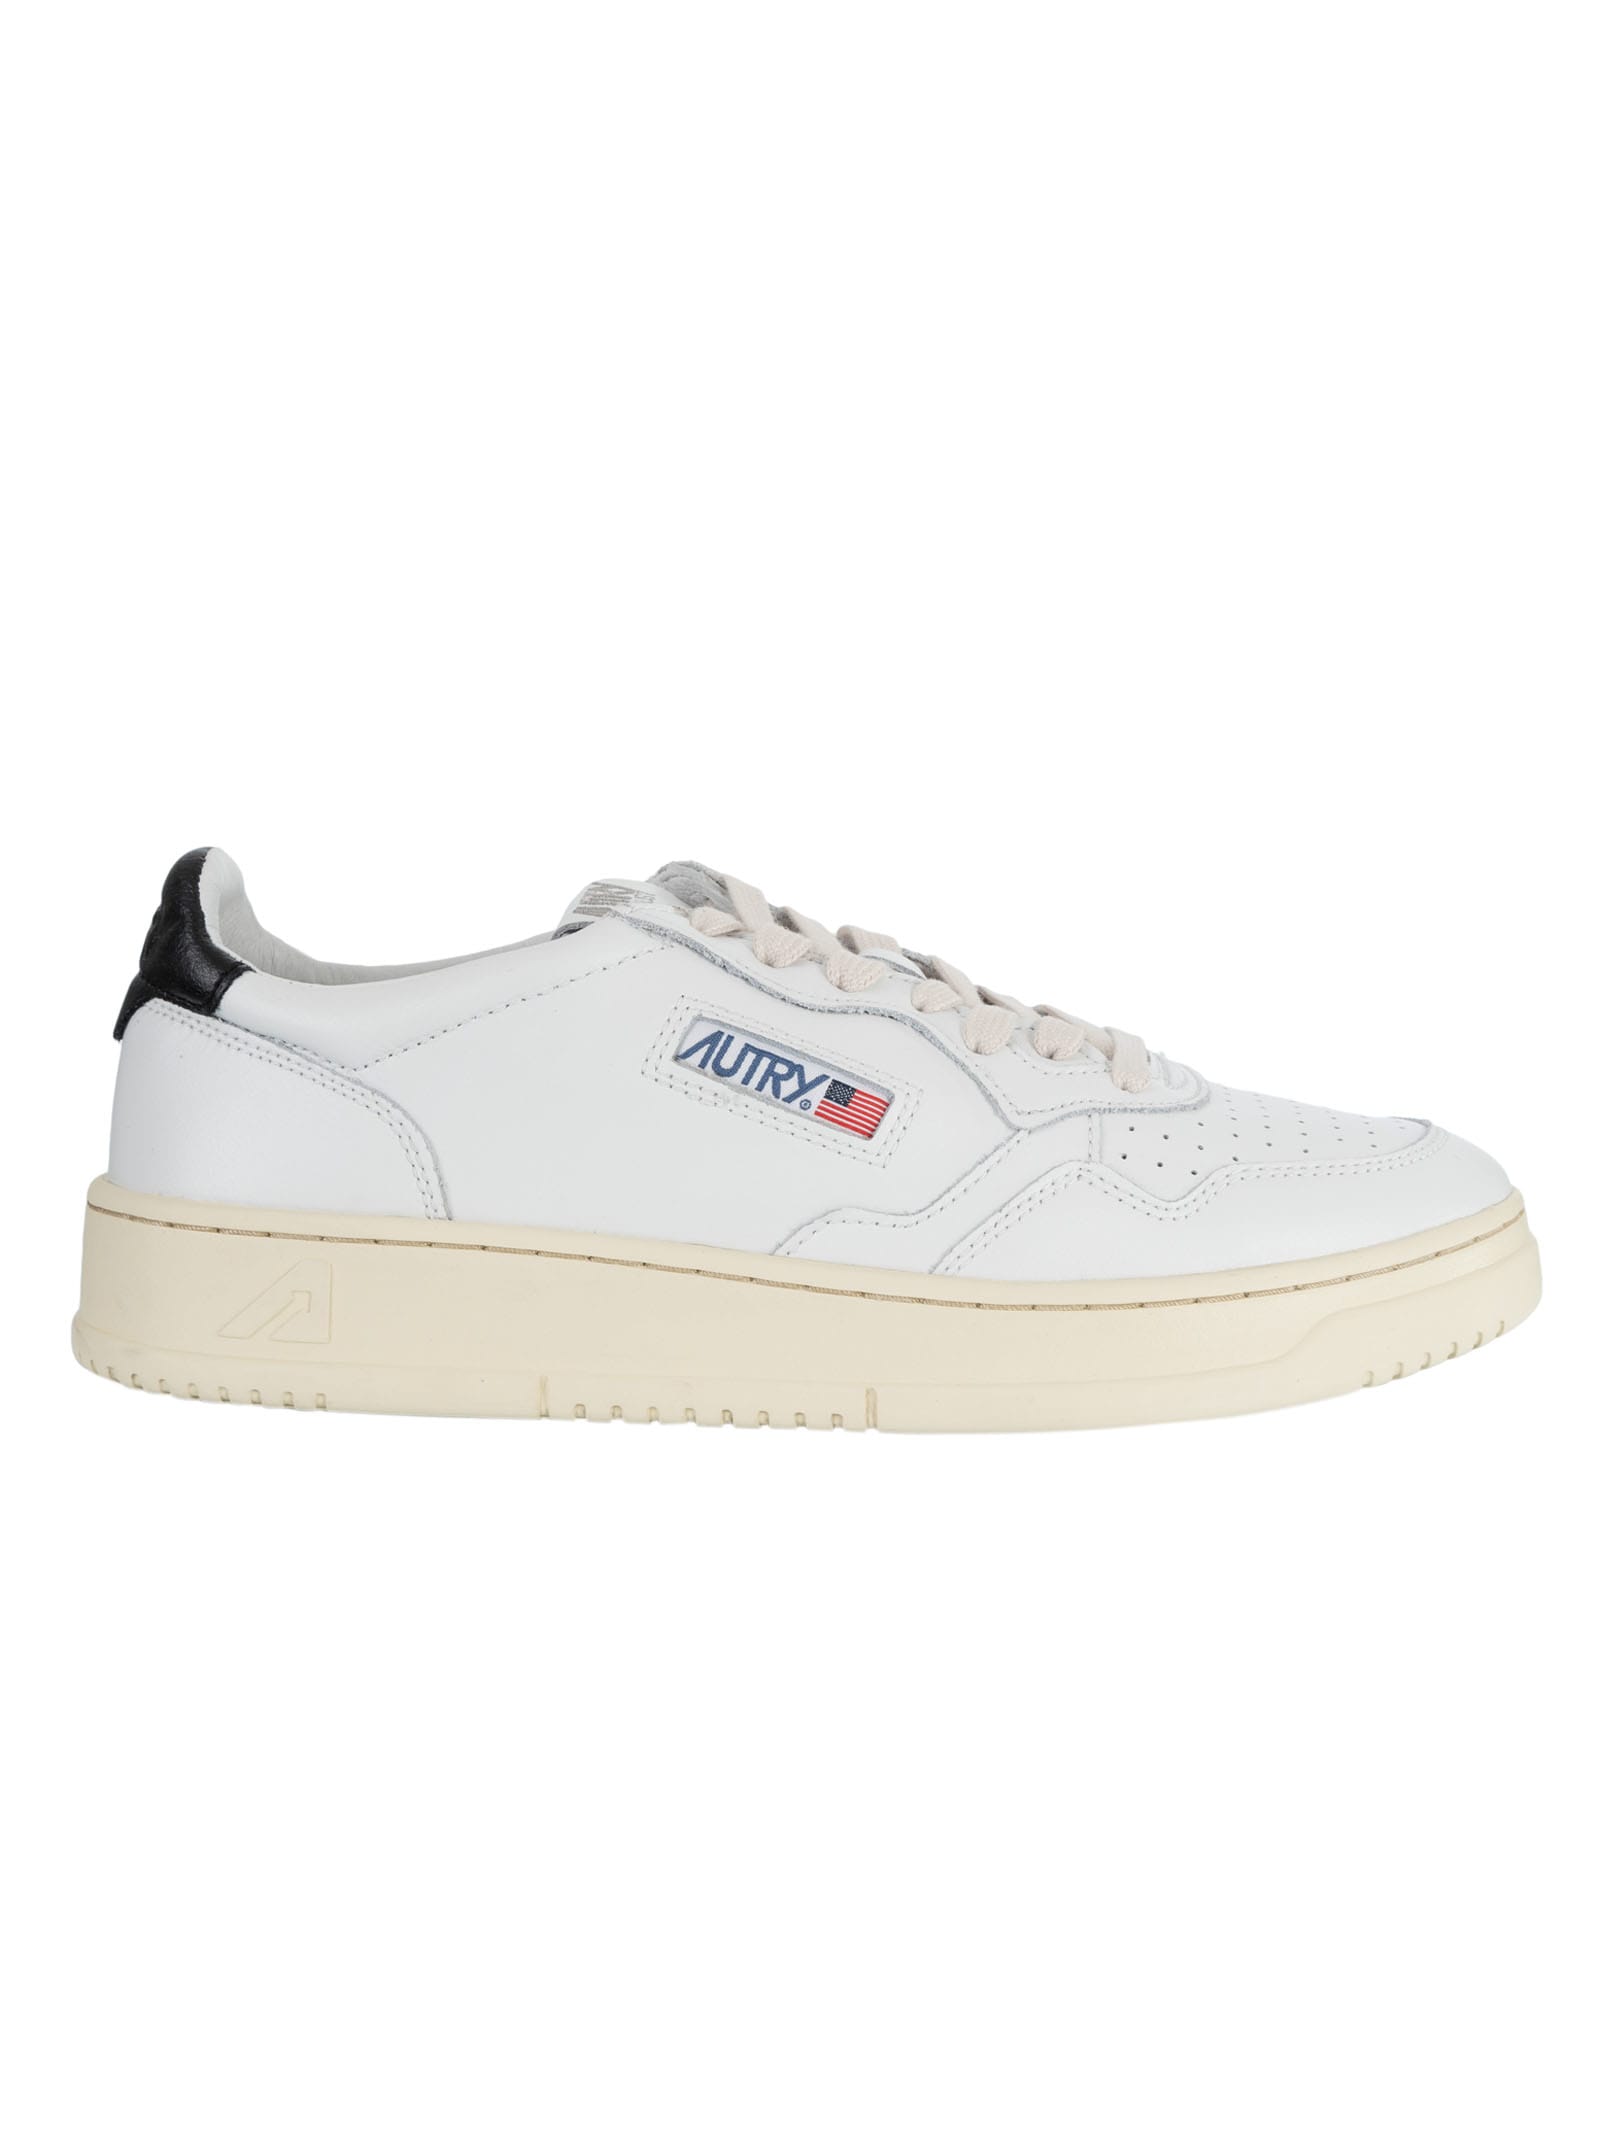 Shop Autry Logo Patched Low Sneakers In White/black